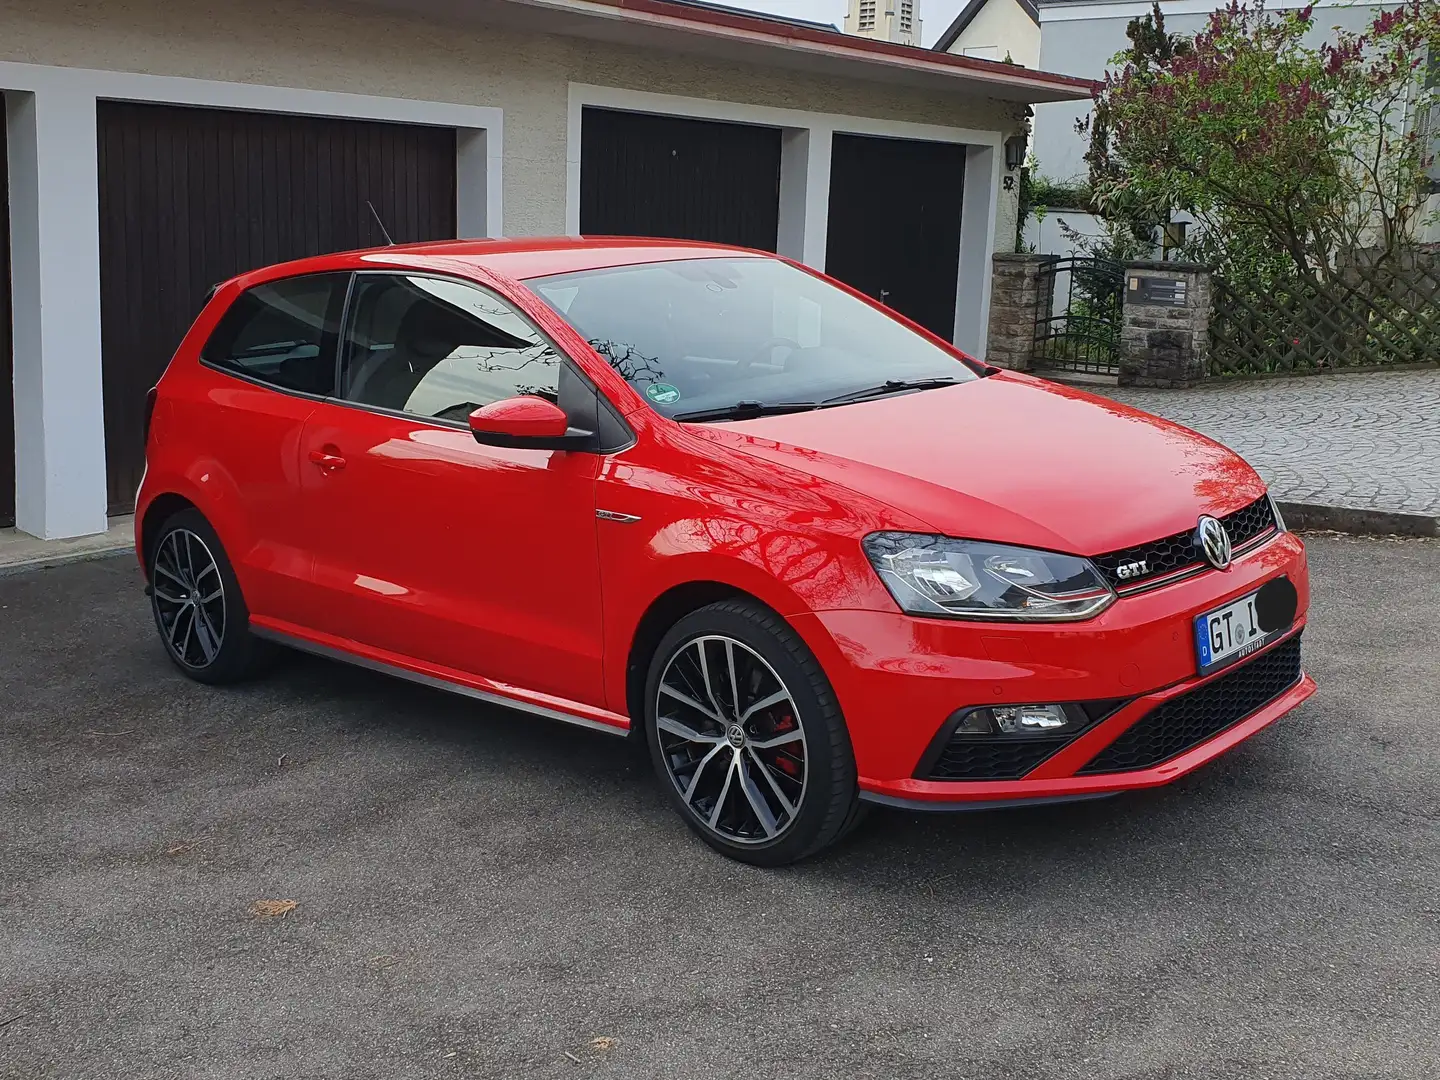 Volkswagen Polo GTI Polo 1.8 TSI (Blue Motion Technology) GTI Red - 2